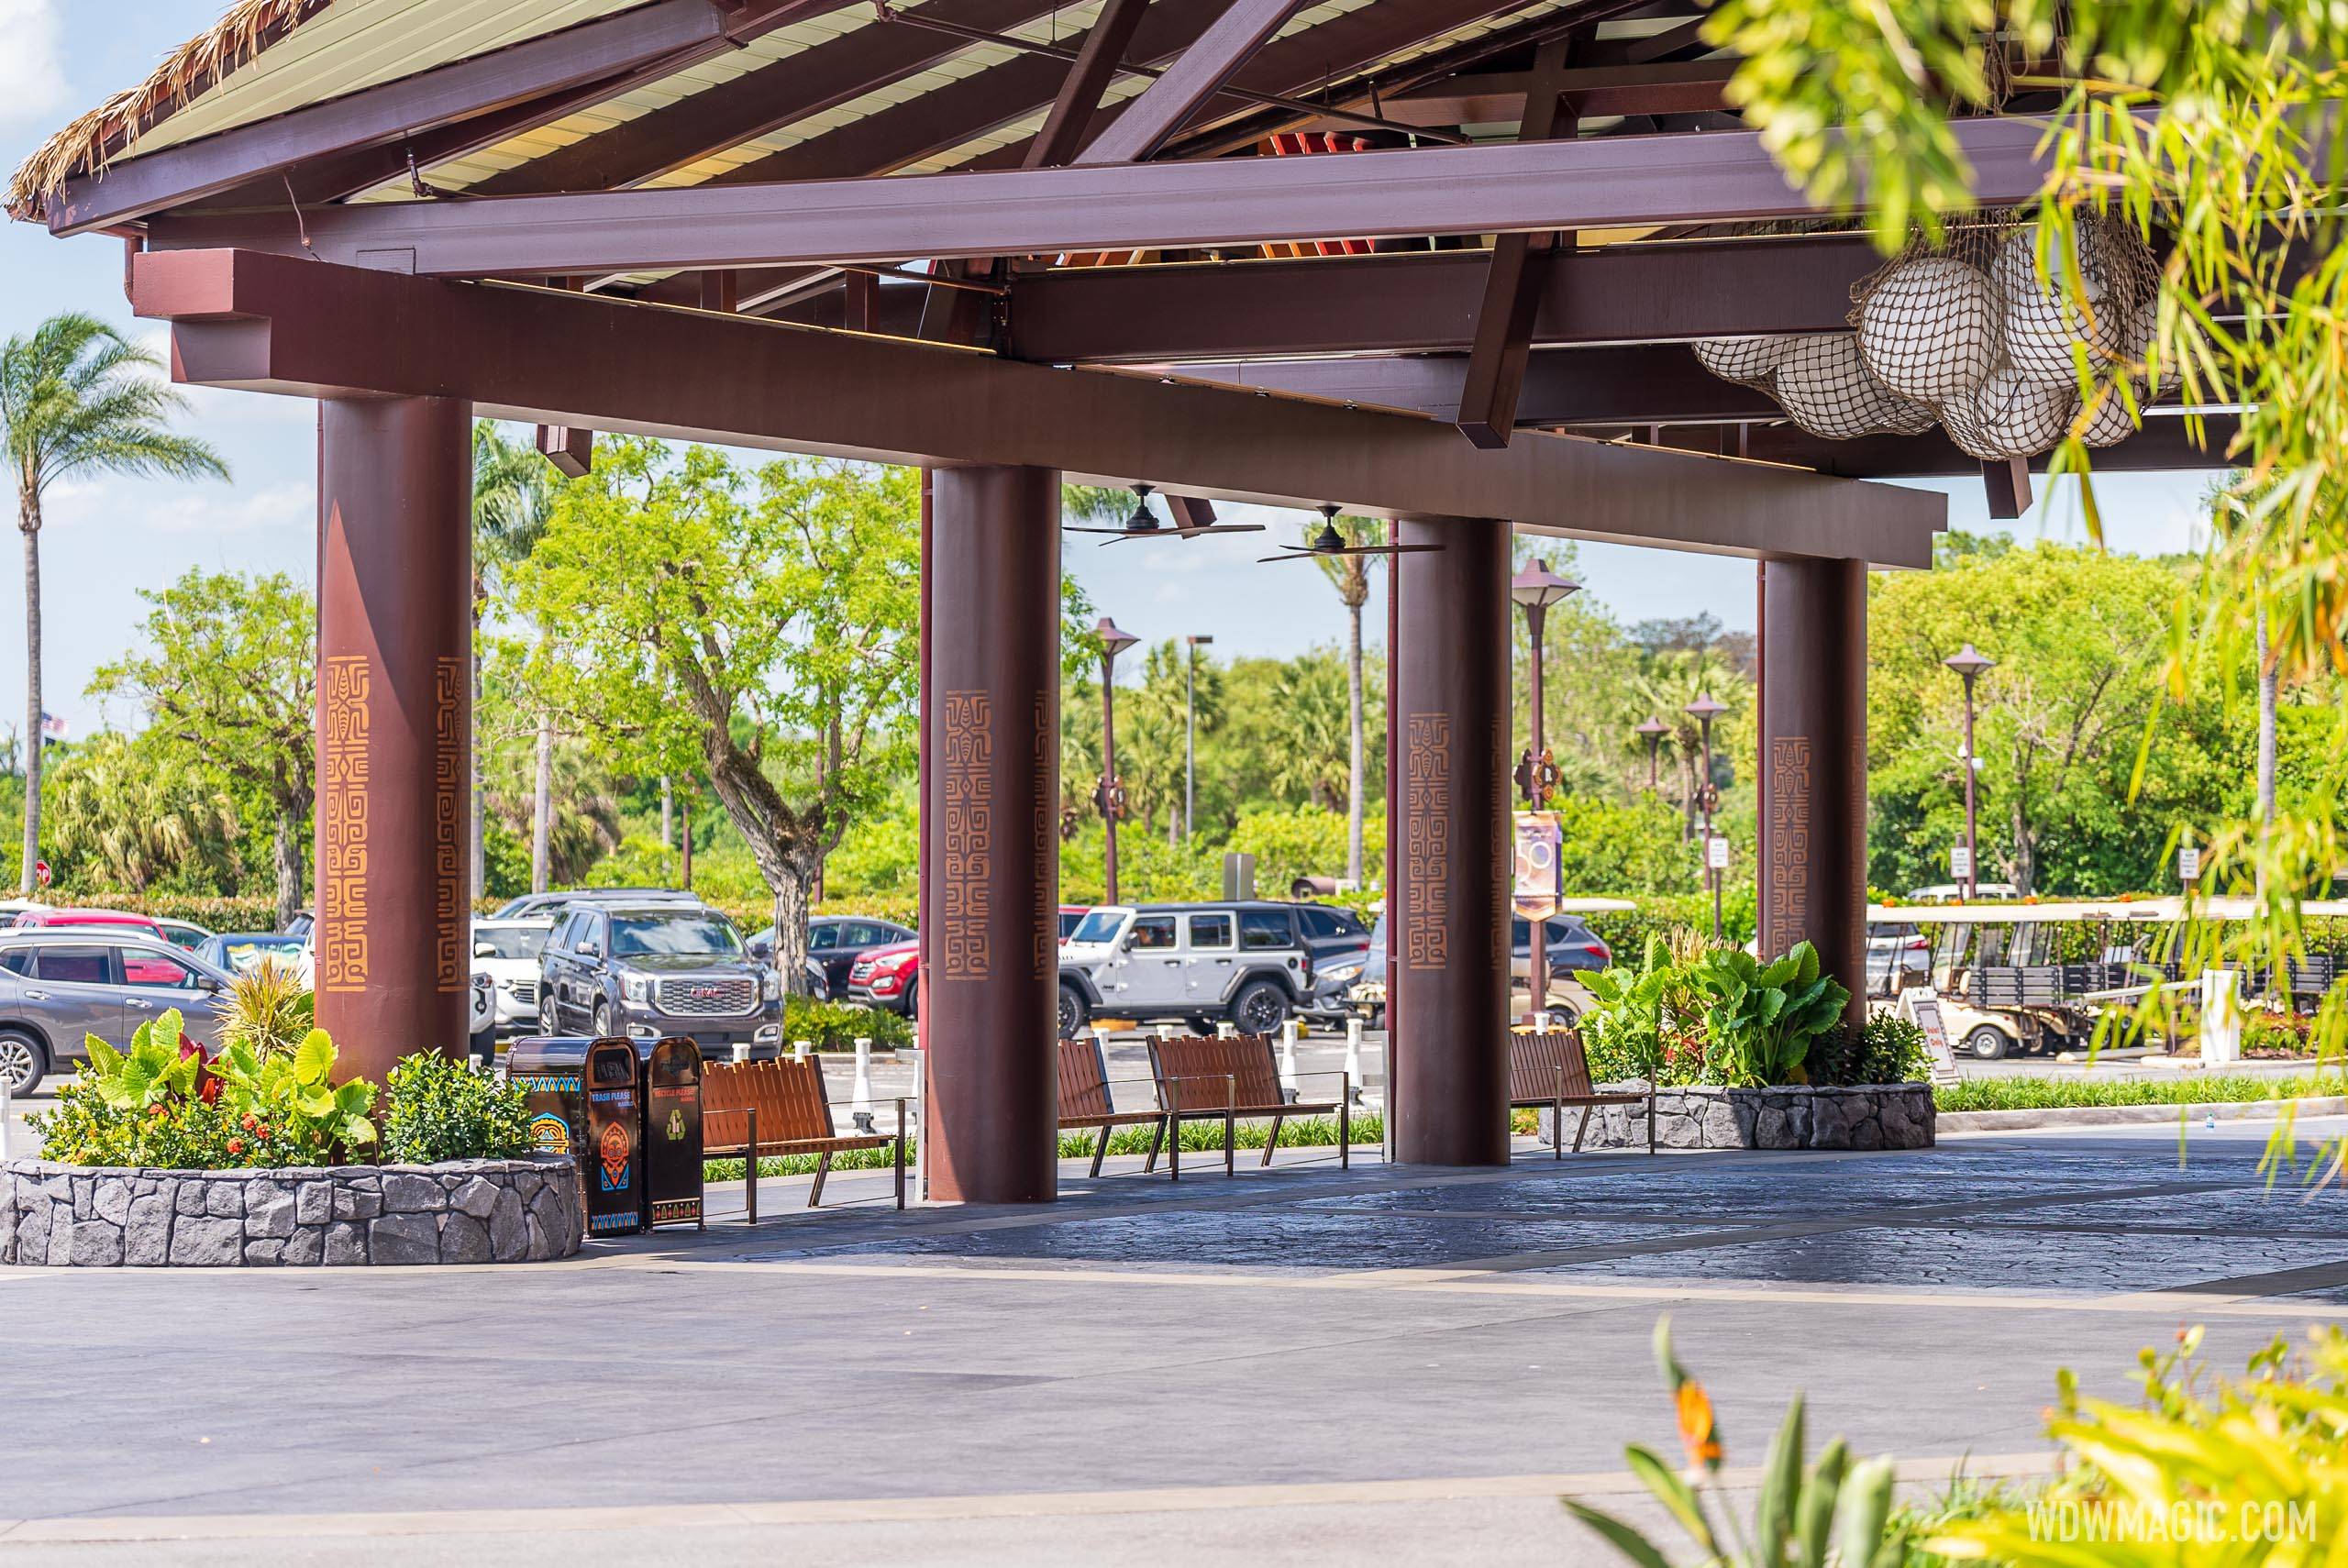 New details added to Porte Cochere entrance area